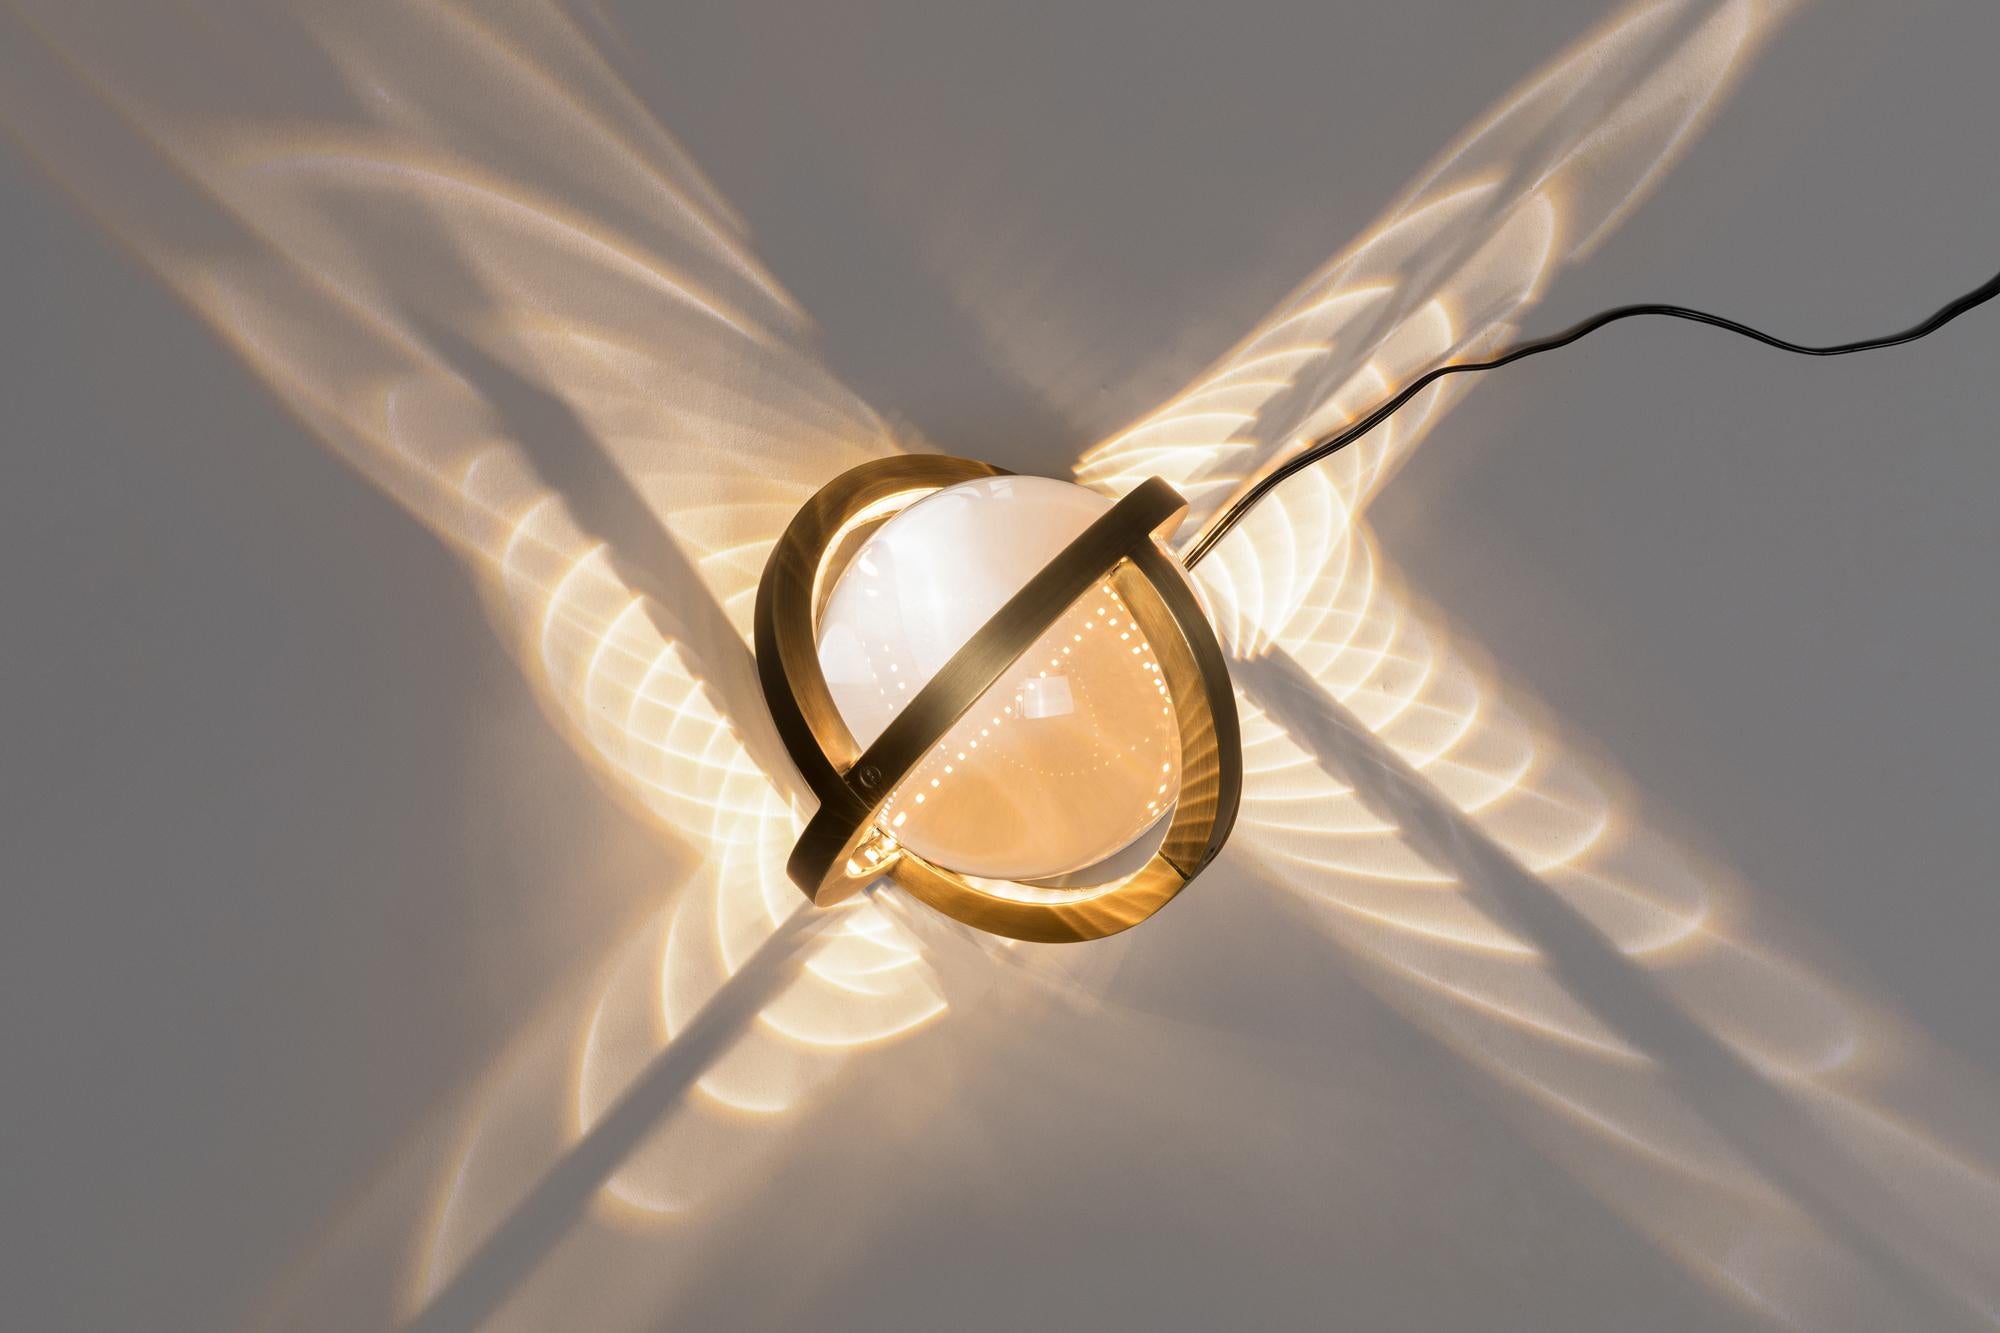 The new Planetaria lights are both geometric and organic. The lights rep-resent an exploration of the globe; one created by folding and rotating three flat circles to create a single sphere, which itself encases a reflective glass orb. The seed pod